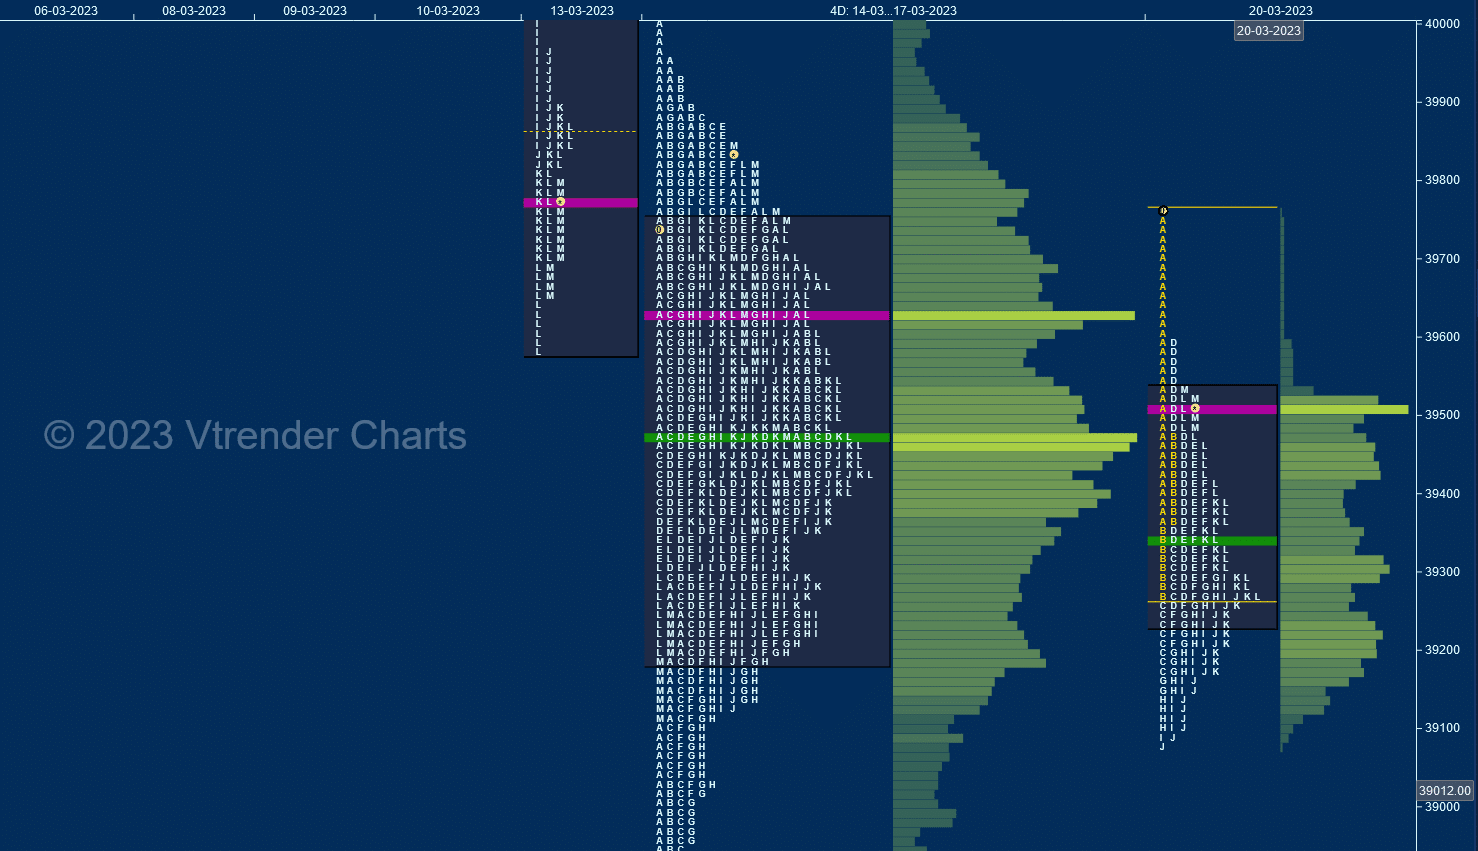 Bnf 12 Market Profile Analysis Dated 20Th Mar 2023 Banknifty Futures, Charts, Day Trading, Intraday Trading, Intraday Trading Strategies, Market Profile, Market Profile Trading Strategies, Nifty Futures, Order Flow Analysis, Support And Resistance, Technical Analysis, Trading Strategies, Volume Profile Trading